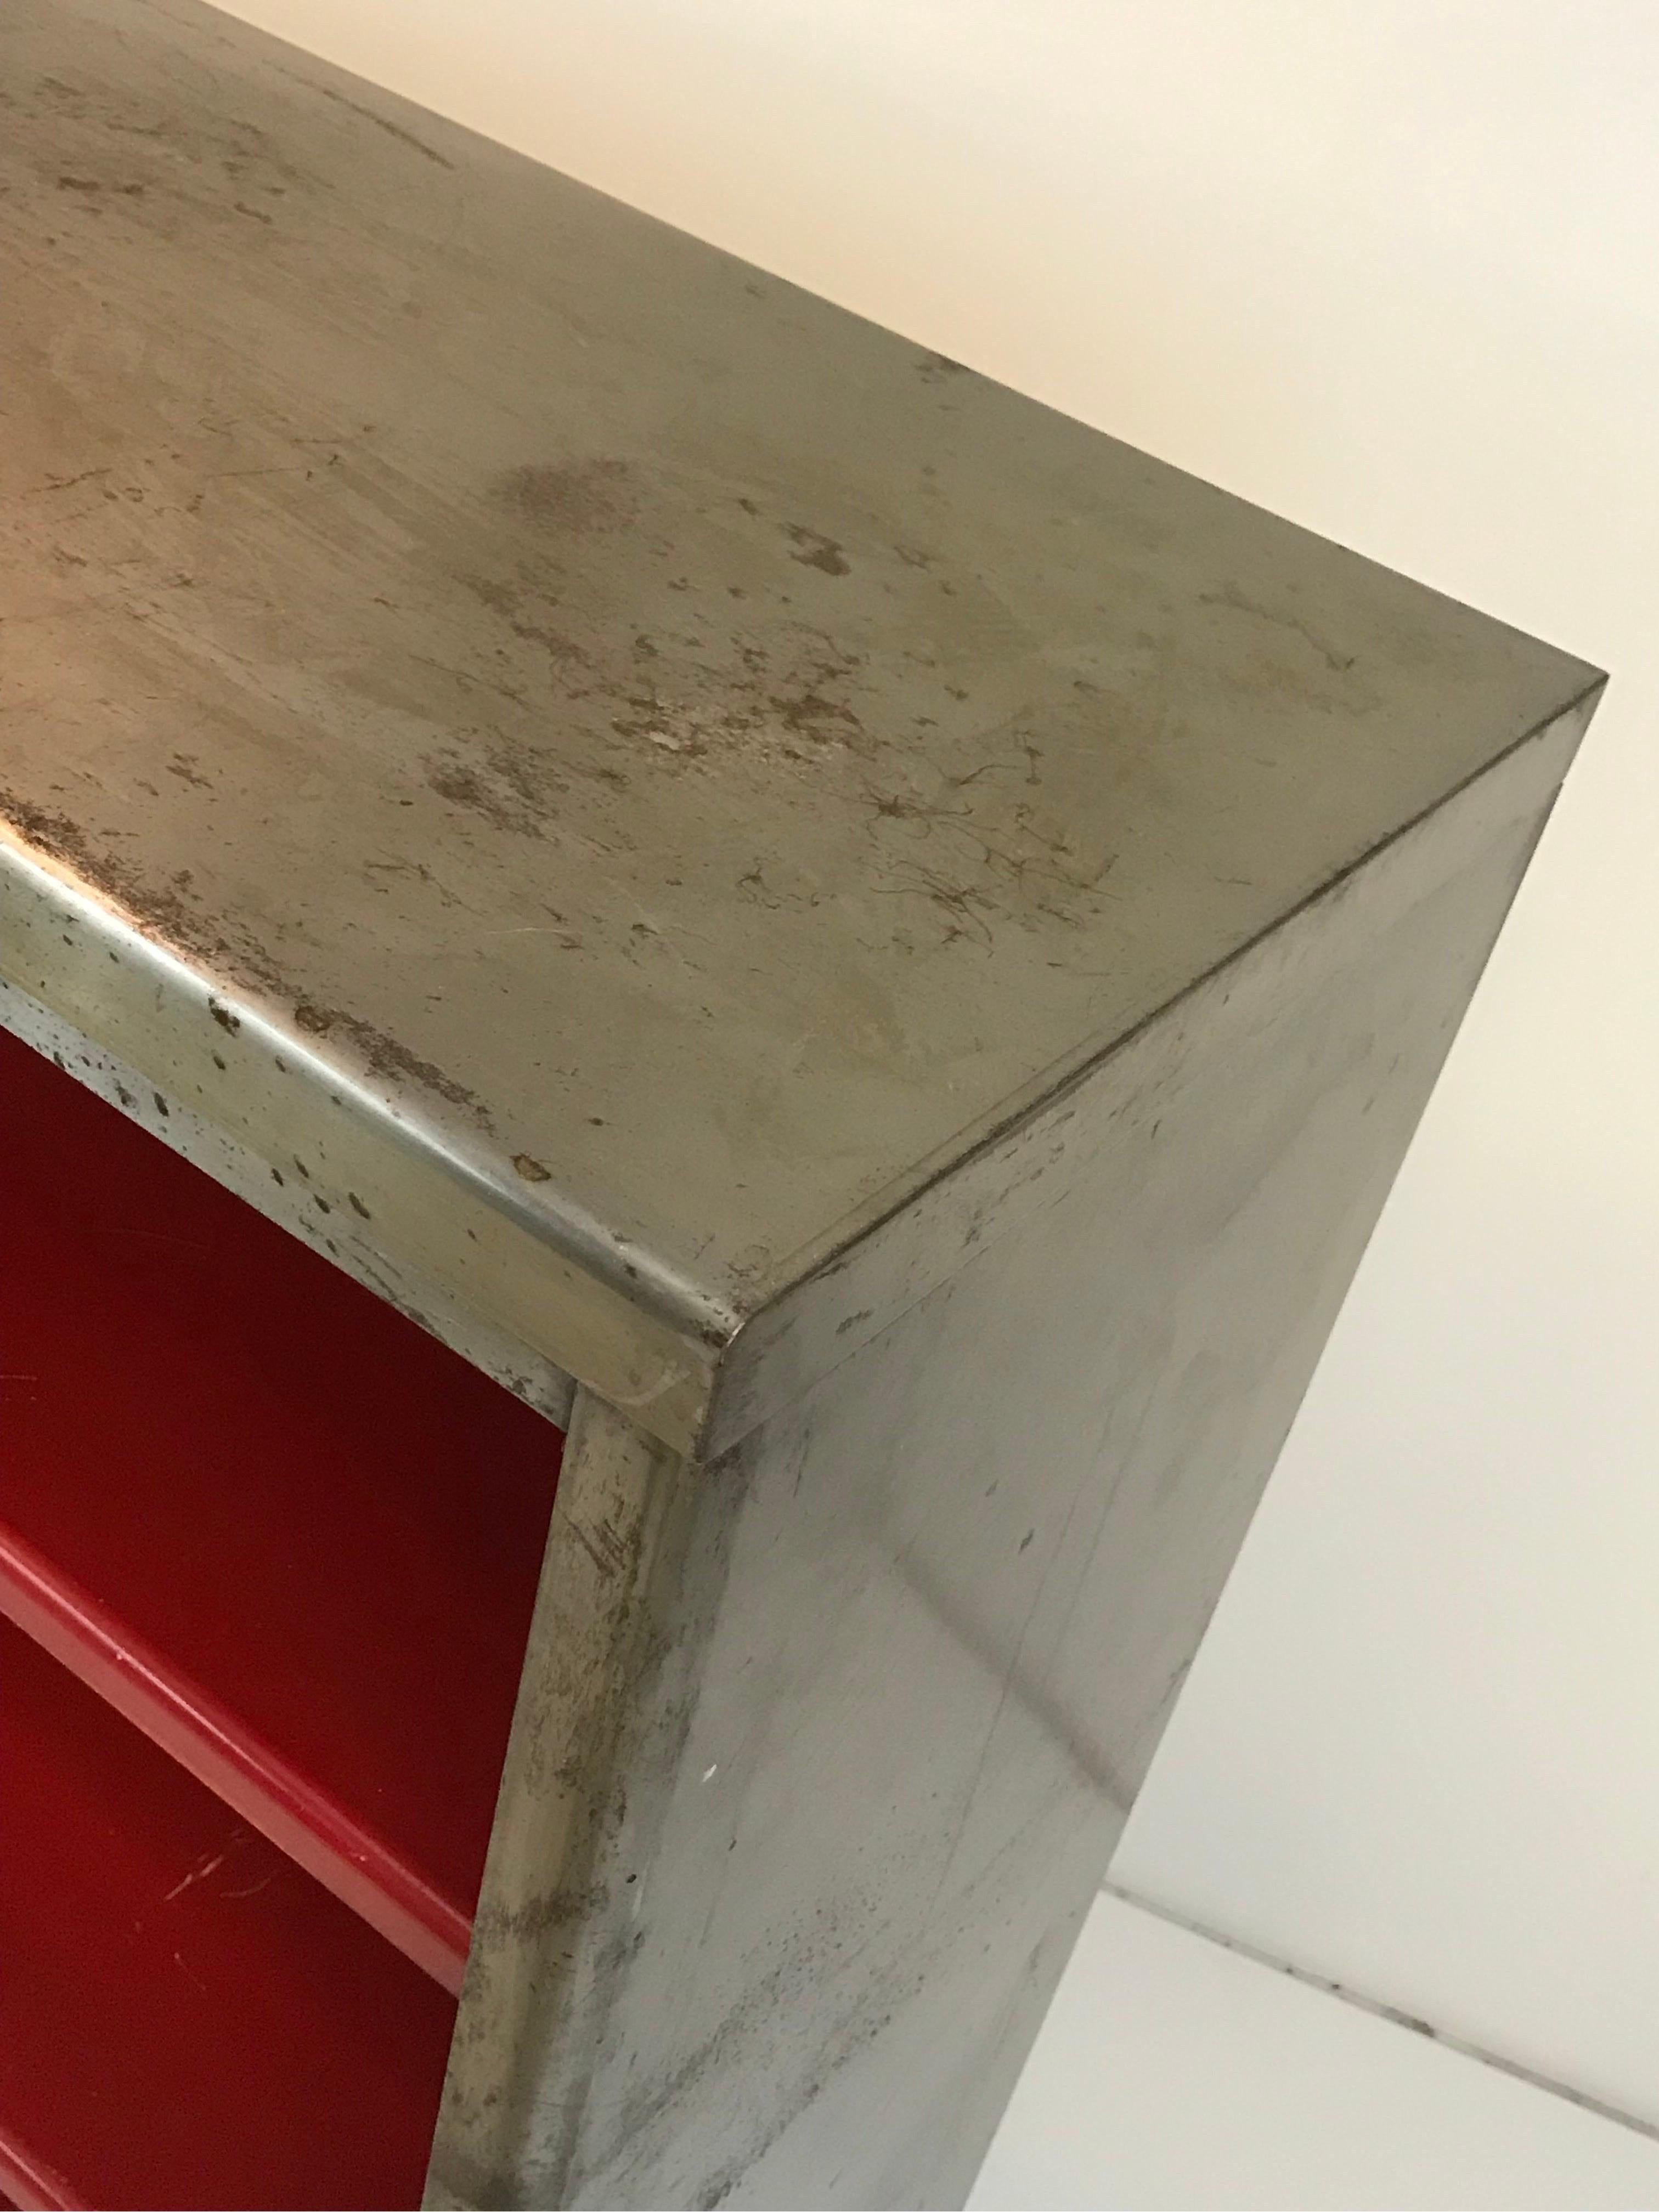 Machine-Made Vintage Art Metal Inc Steel Three Shelf Book Case with Bright Red Interior For Sale